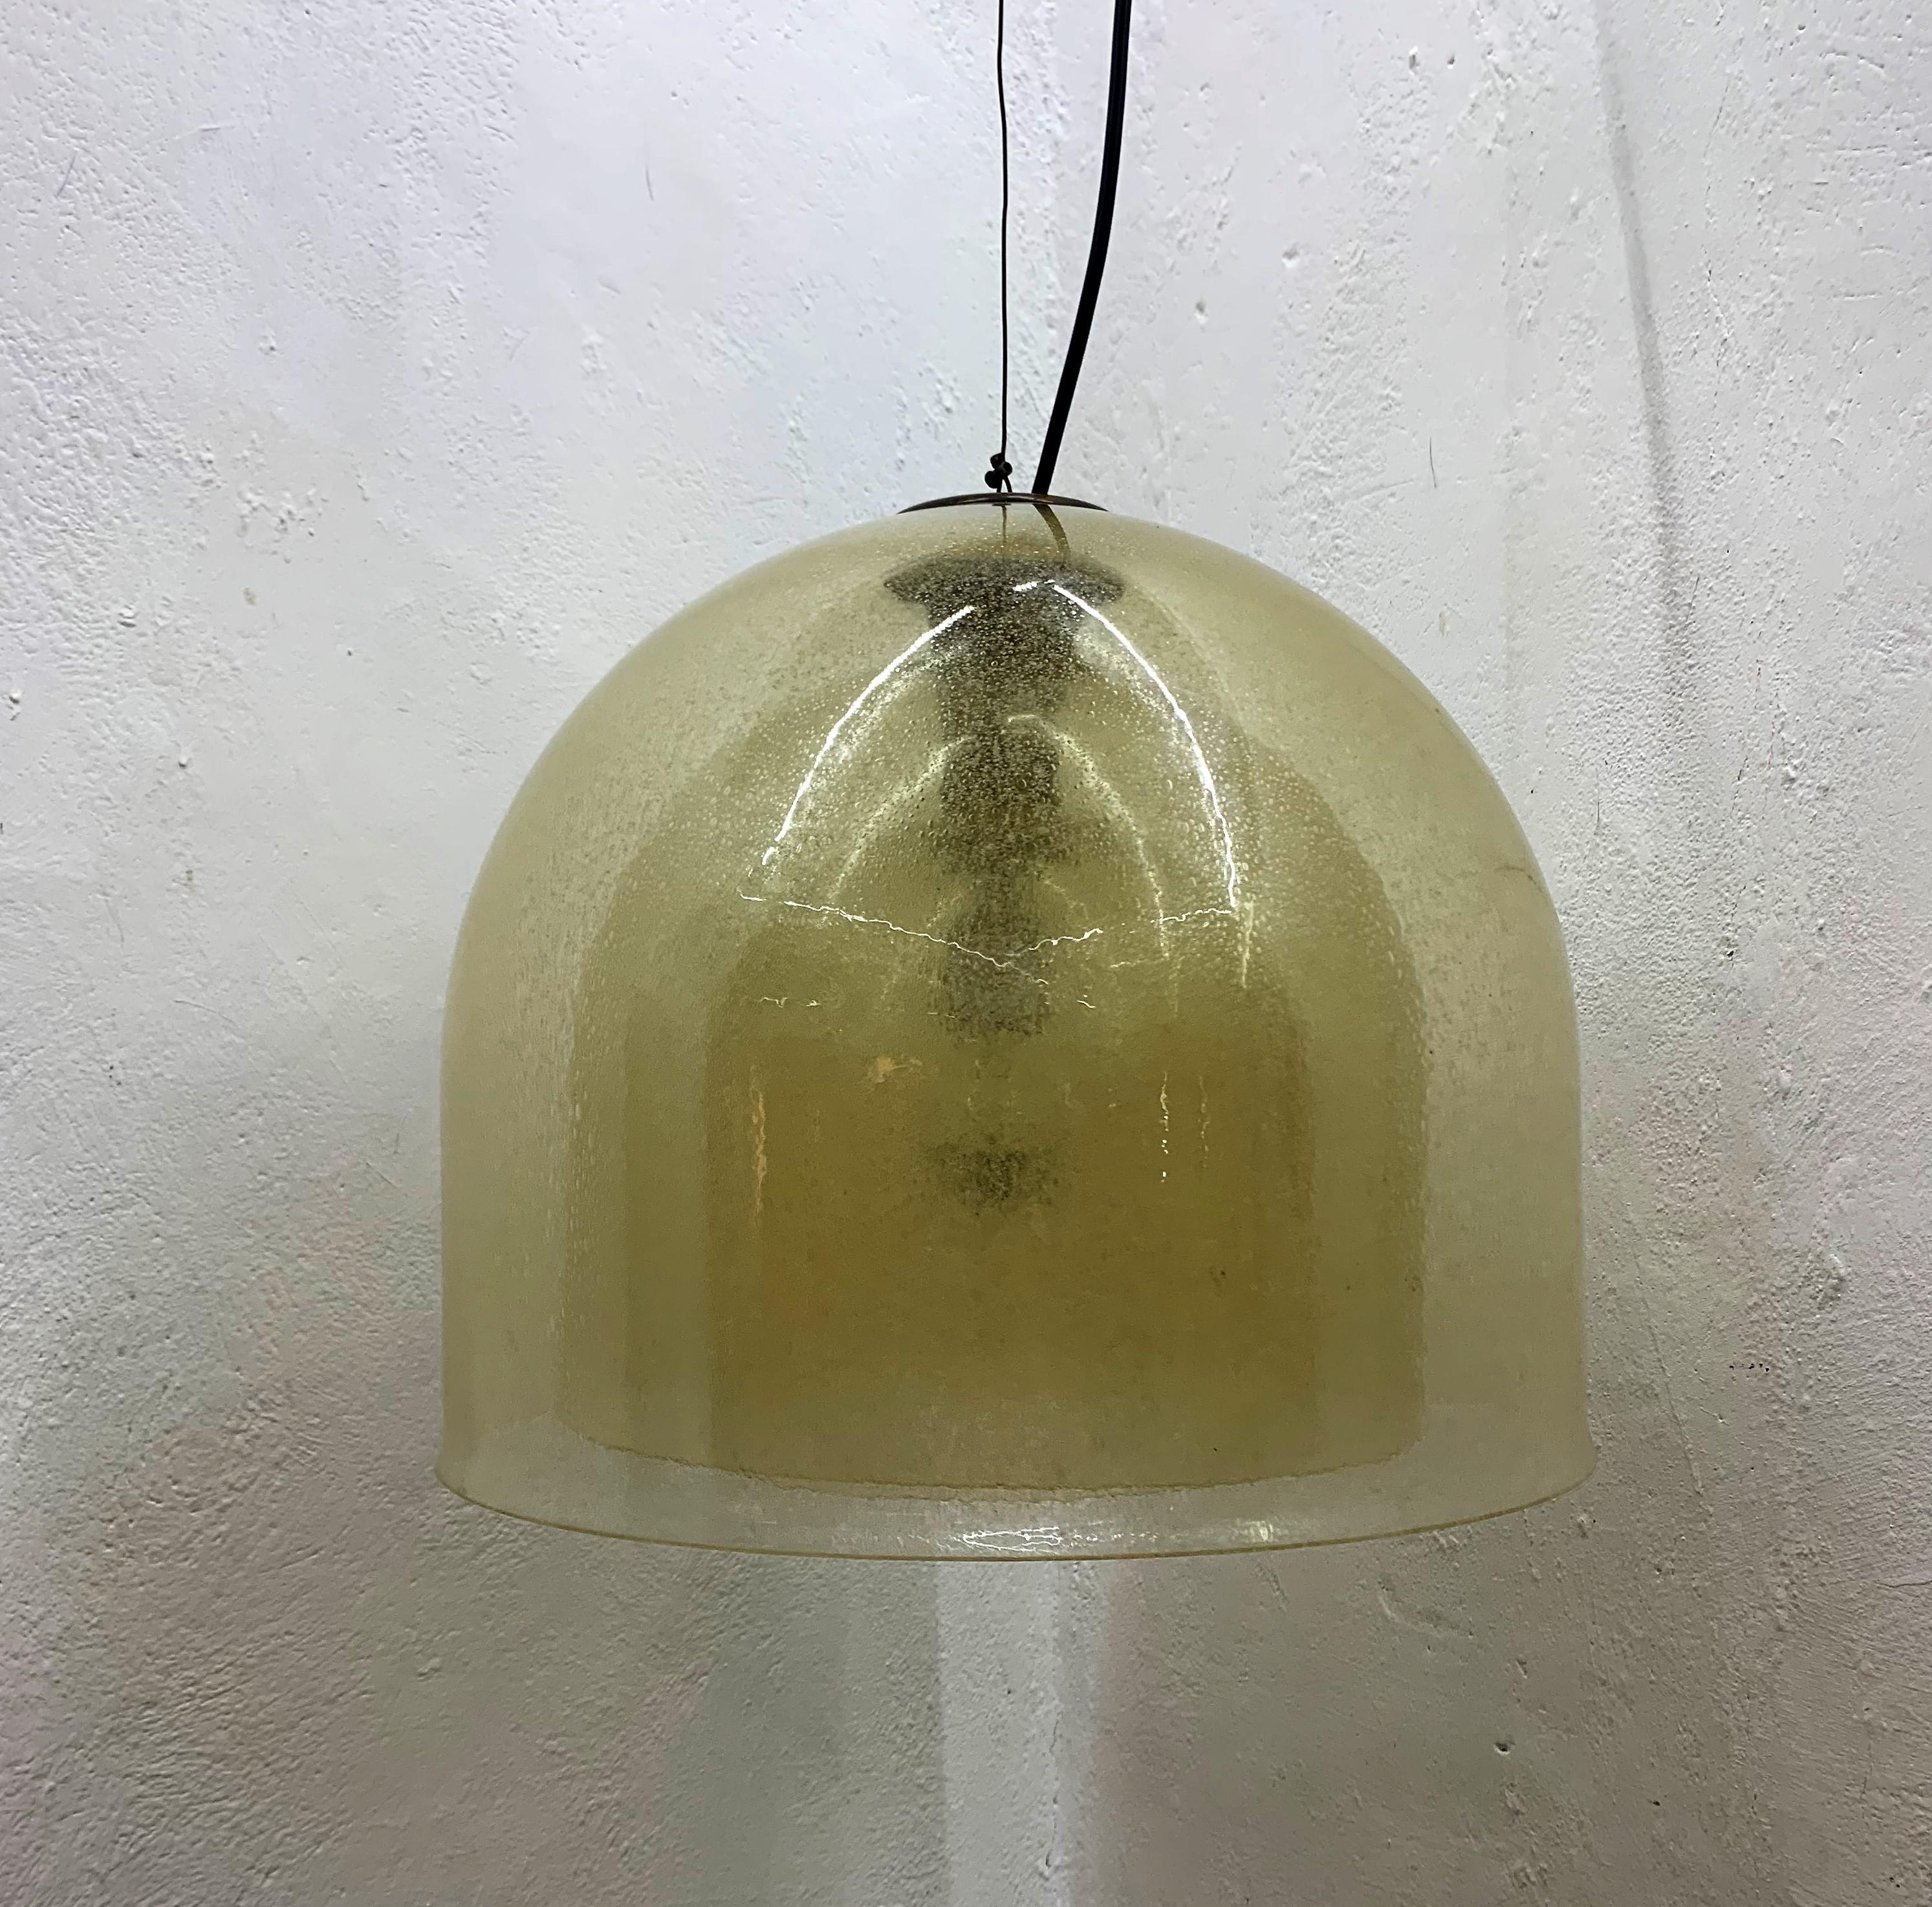 Beautiful and rare Mid-Century Modern chandelier pendant lamp manufactured by Mazzega, designed by Carlo Nason, circa 1960s, Murano, Italy.
This chandelier consists of 3 bell shaped pieces stacked together in an amber gold Murano glass executed in